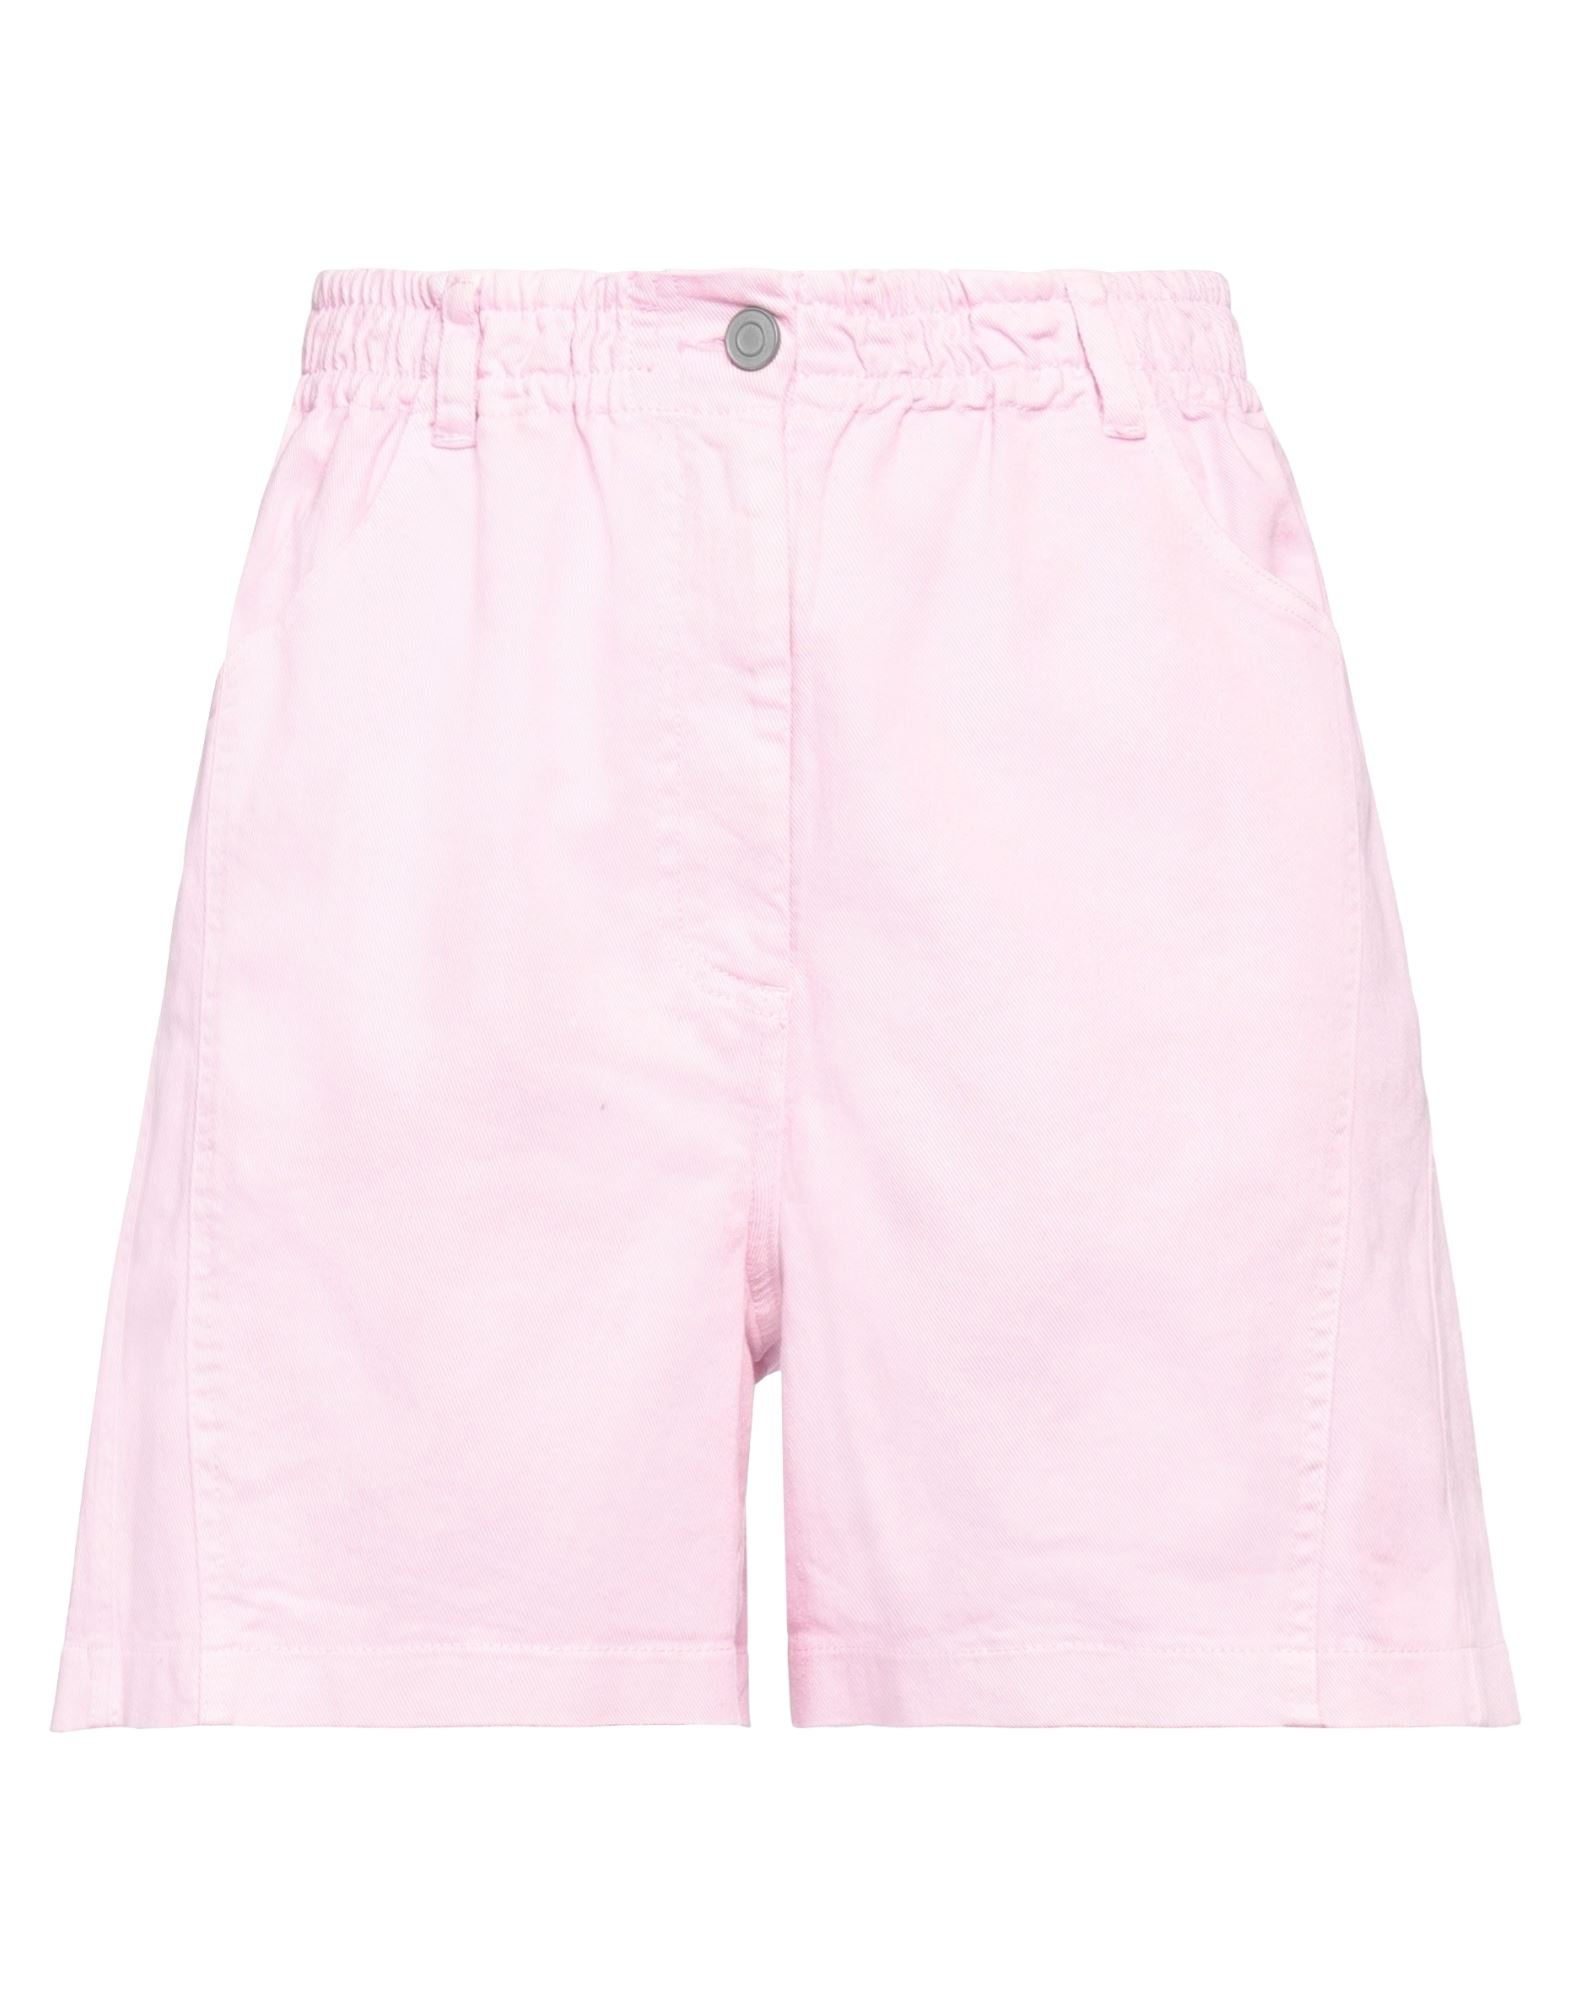 Nude Denim Shorts In Pink